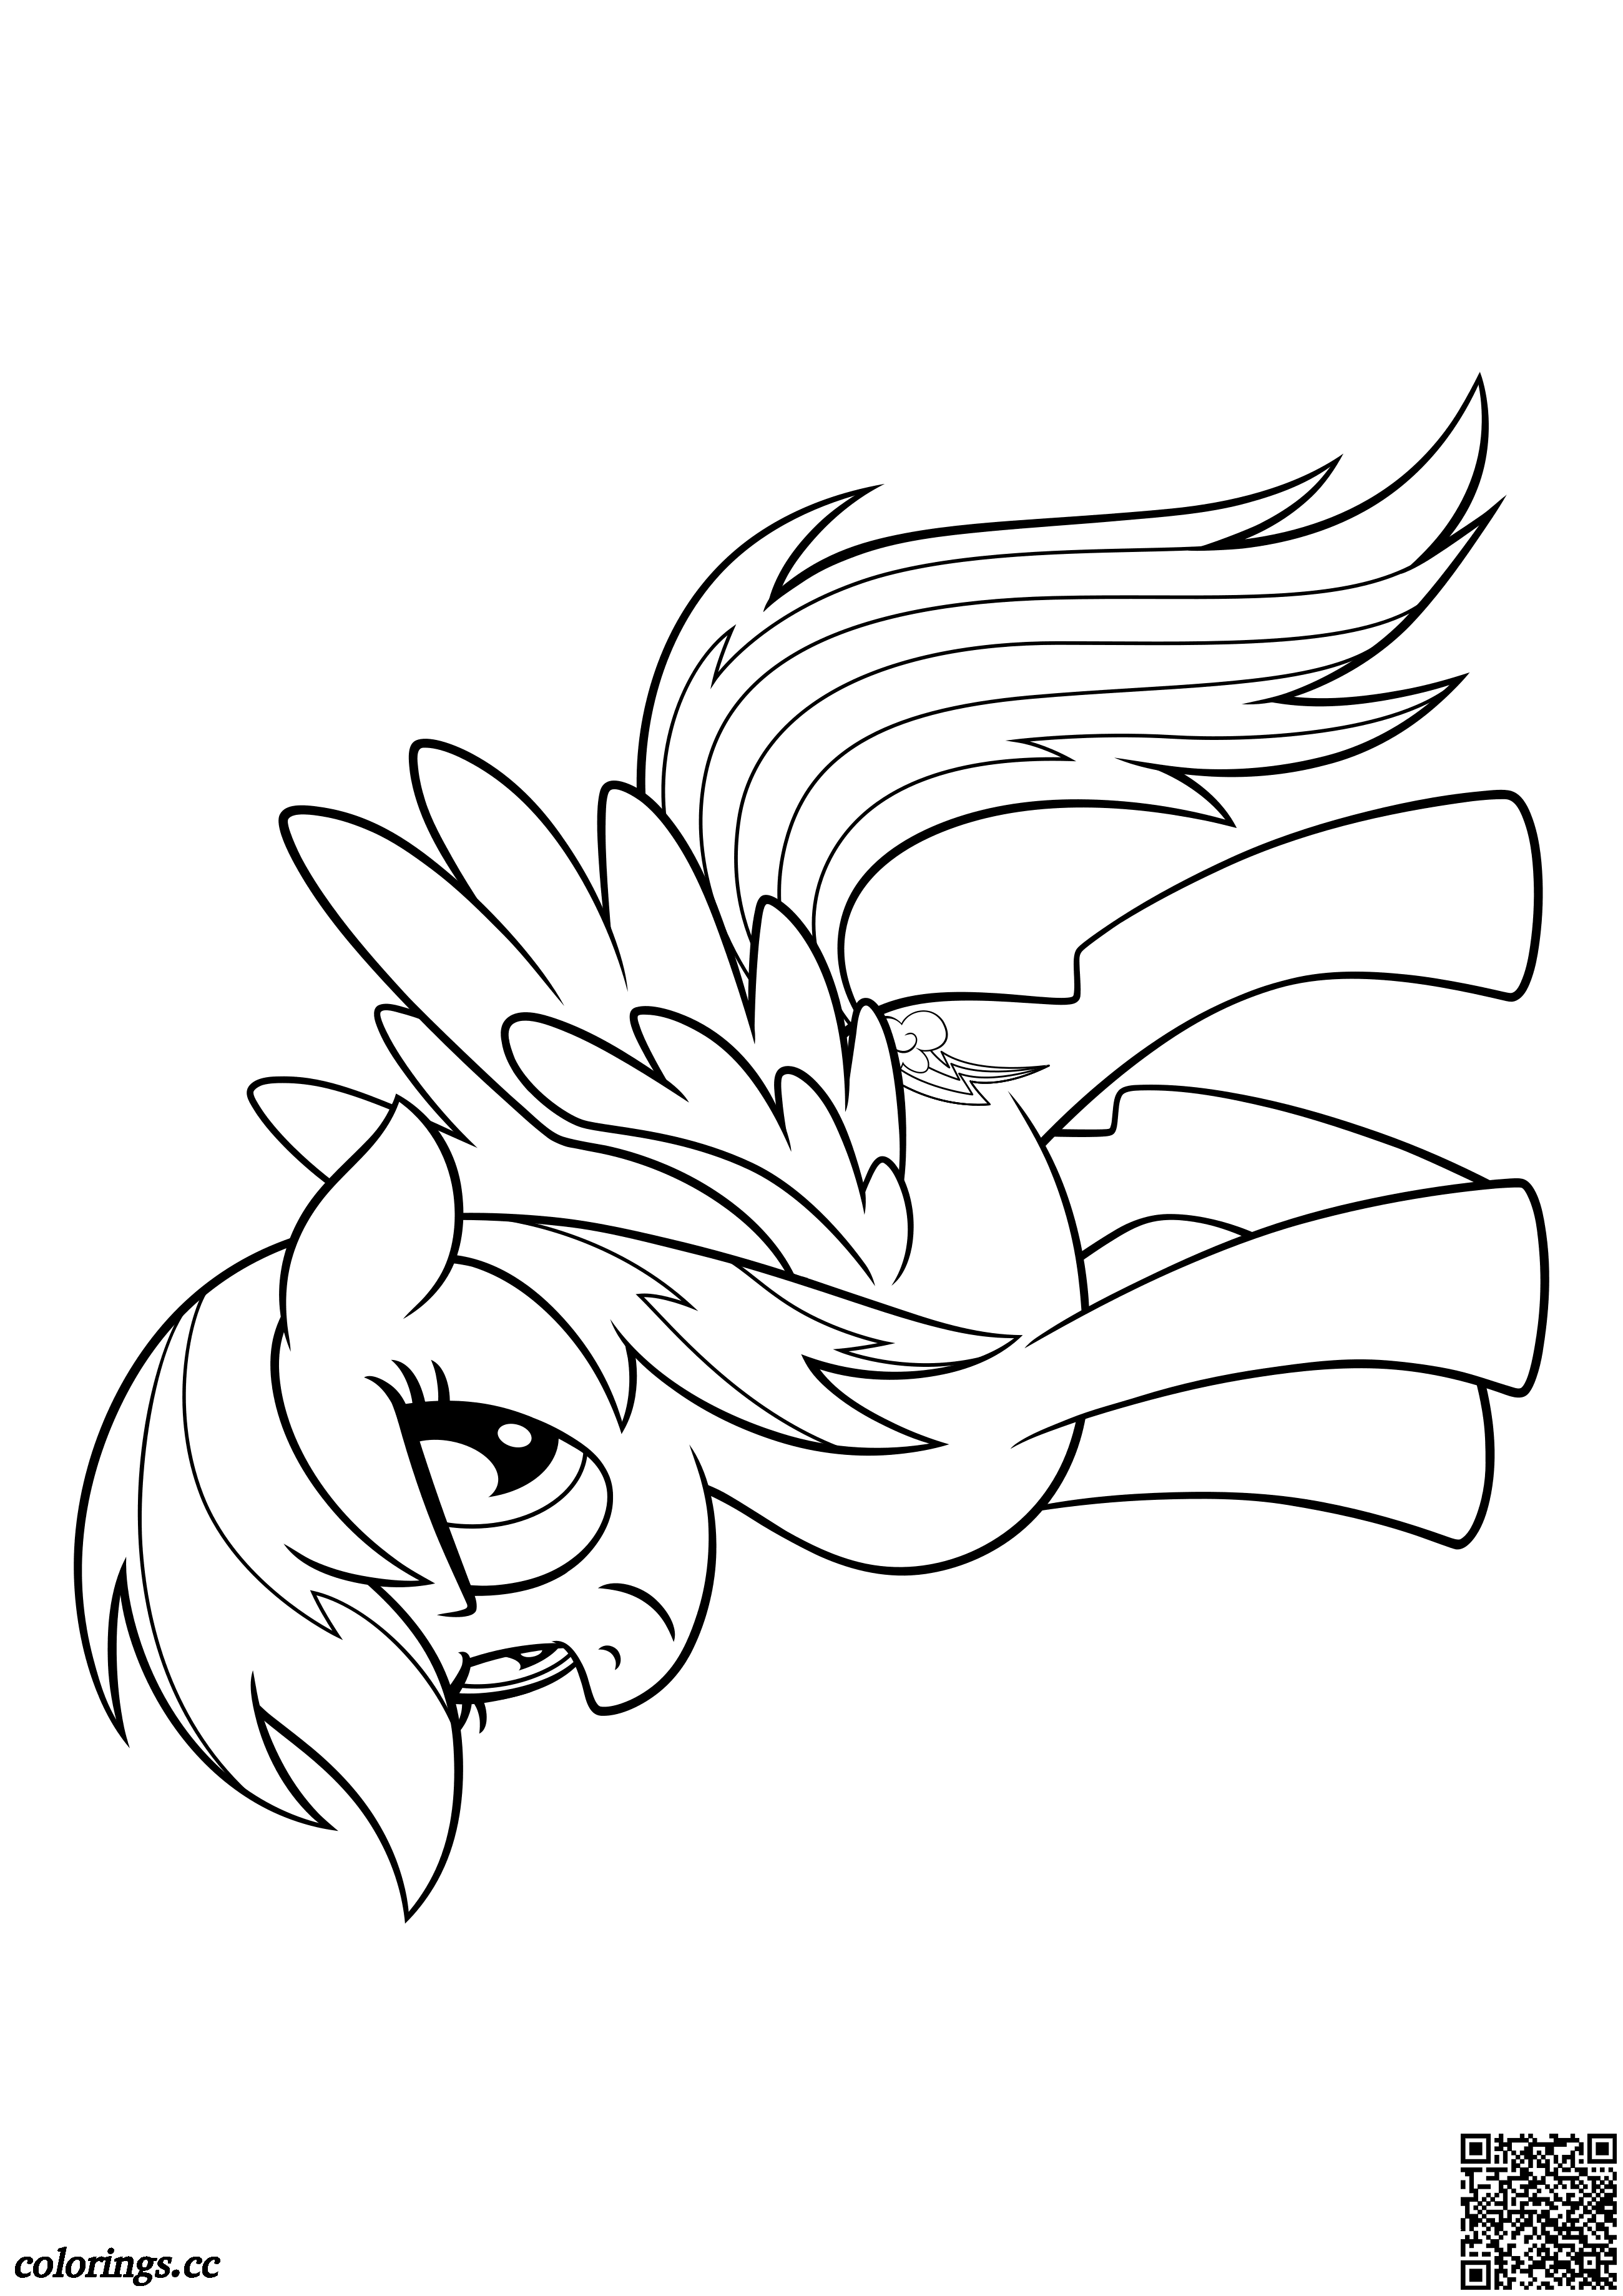 My Little Pony   Rainbow Dash coloring pages, My little pony movie ...